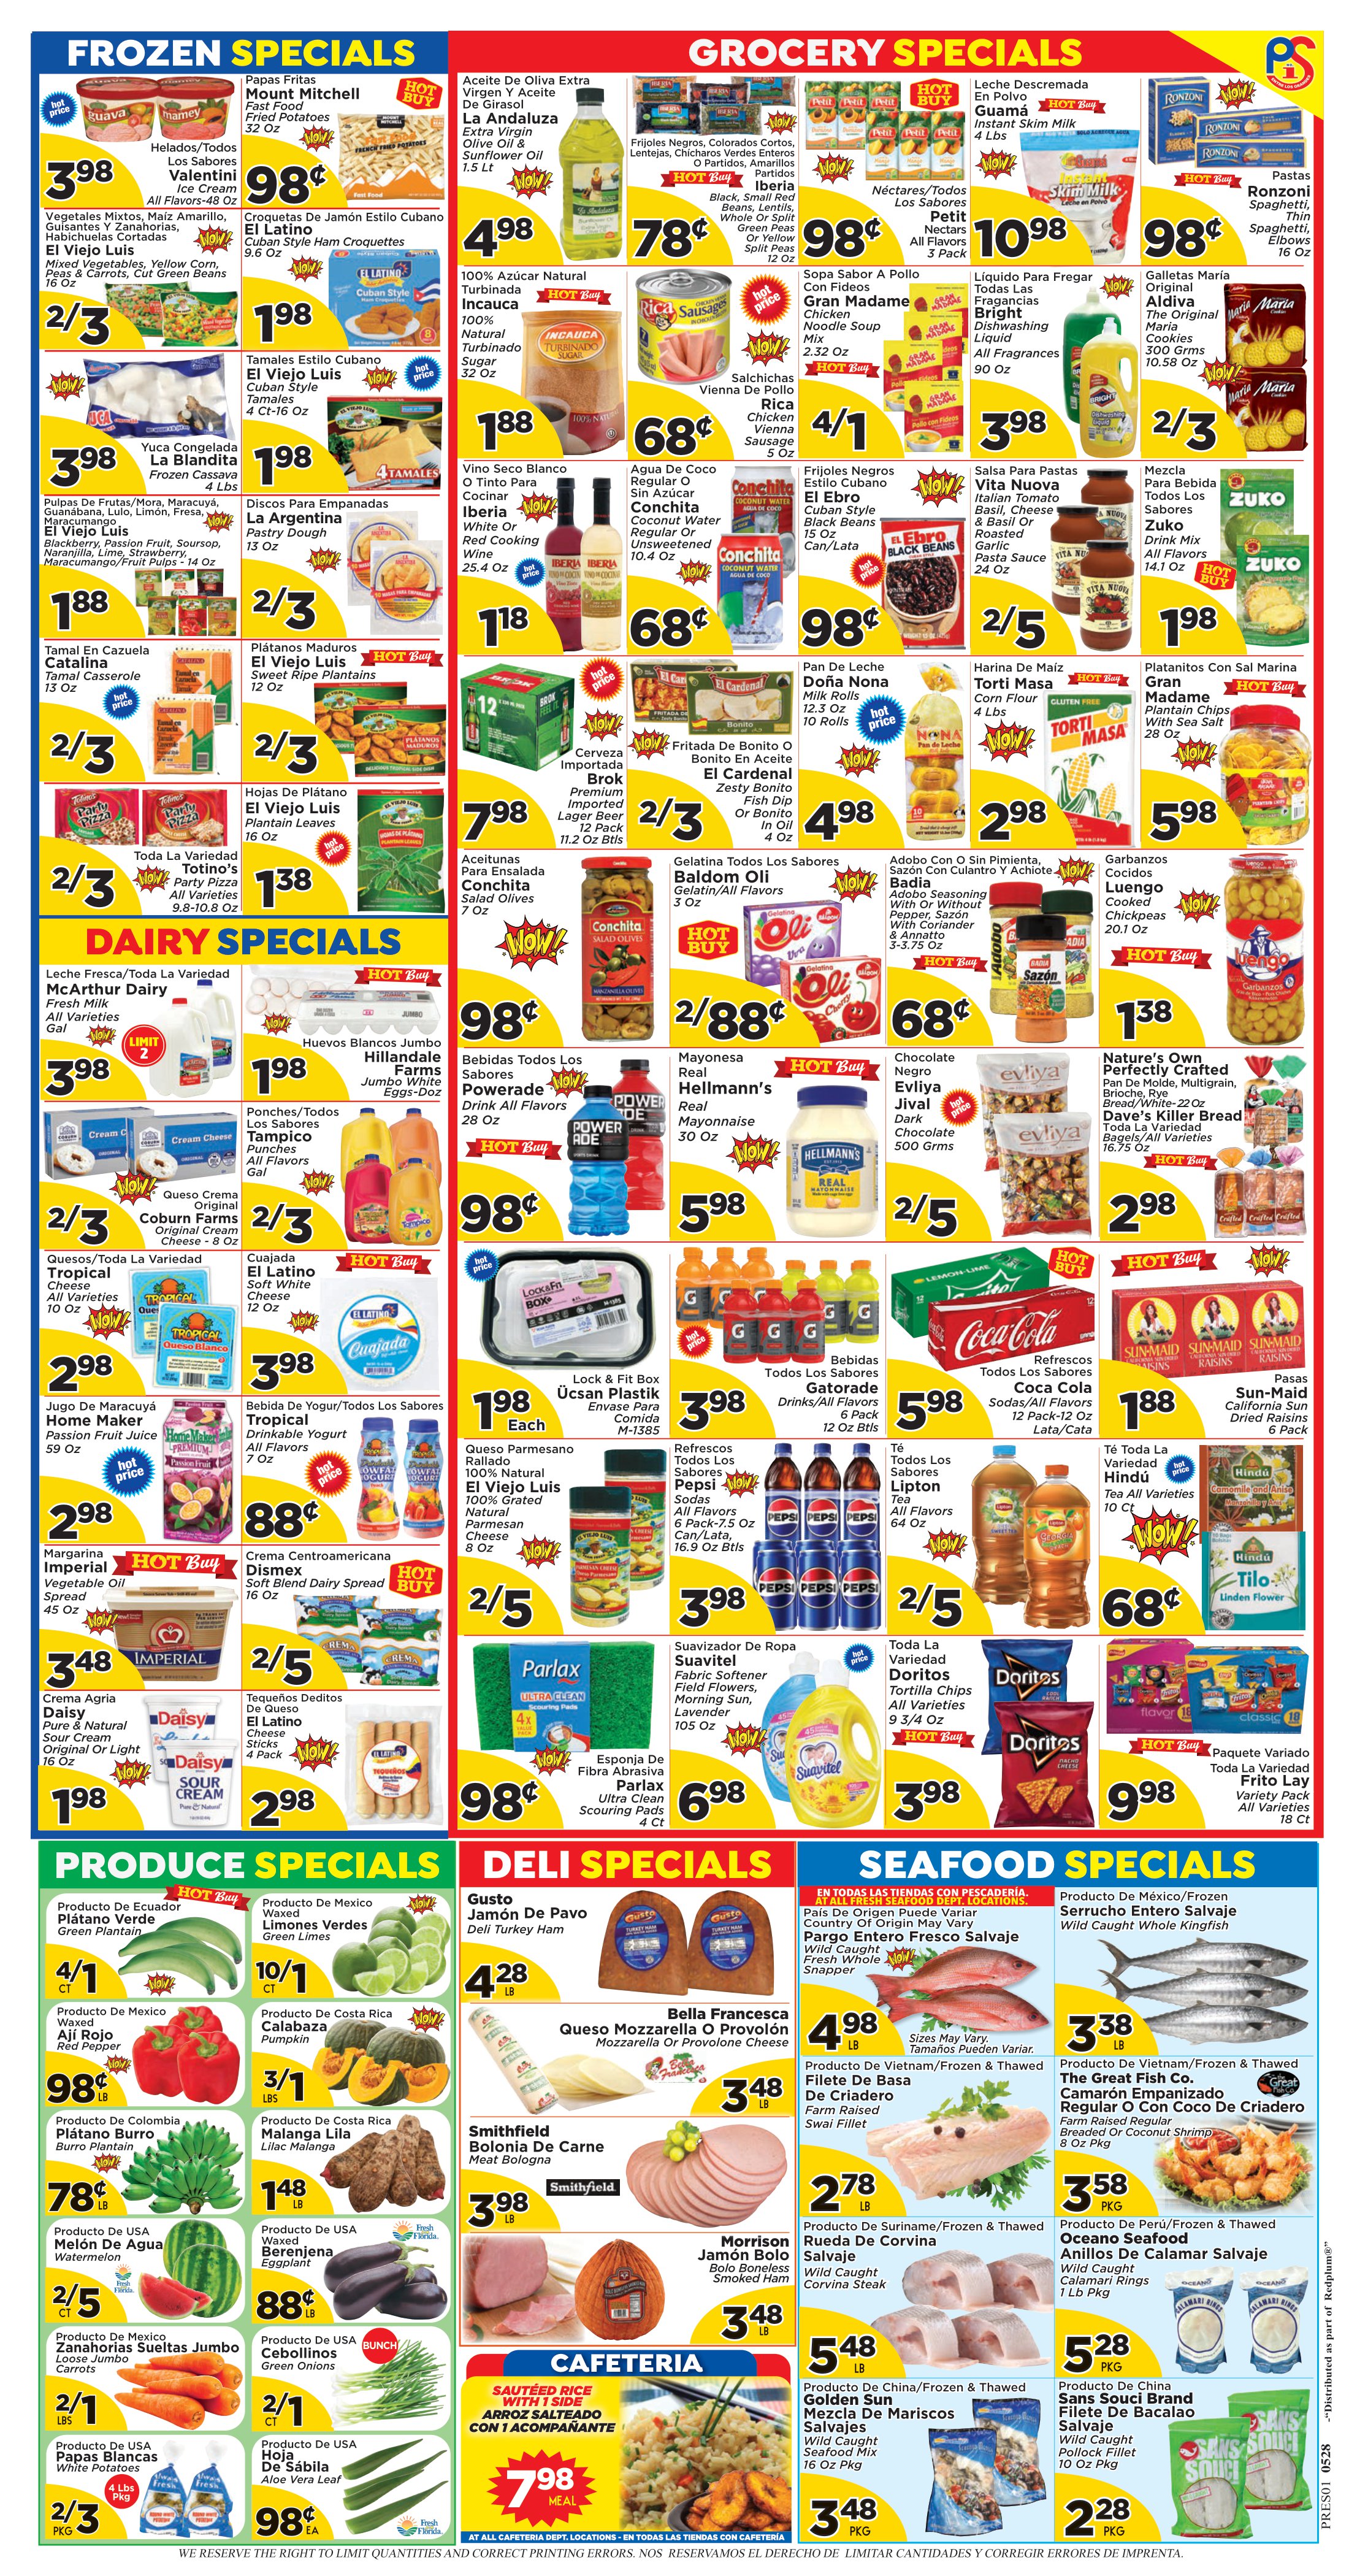 Presidente Supermarket - Weekly Promo for Stores 2, 3, 6, 10, 11, 12, 14, 17, 19, 22, 23, 27, 29, 30, 31, 32 and 44 Page 2